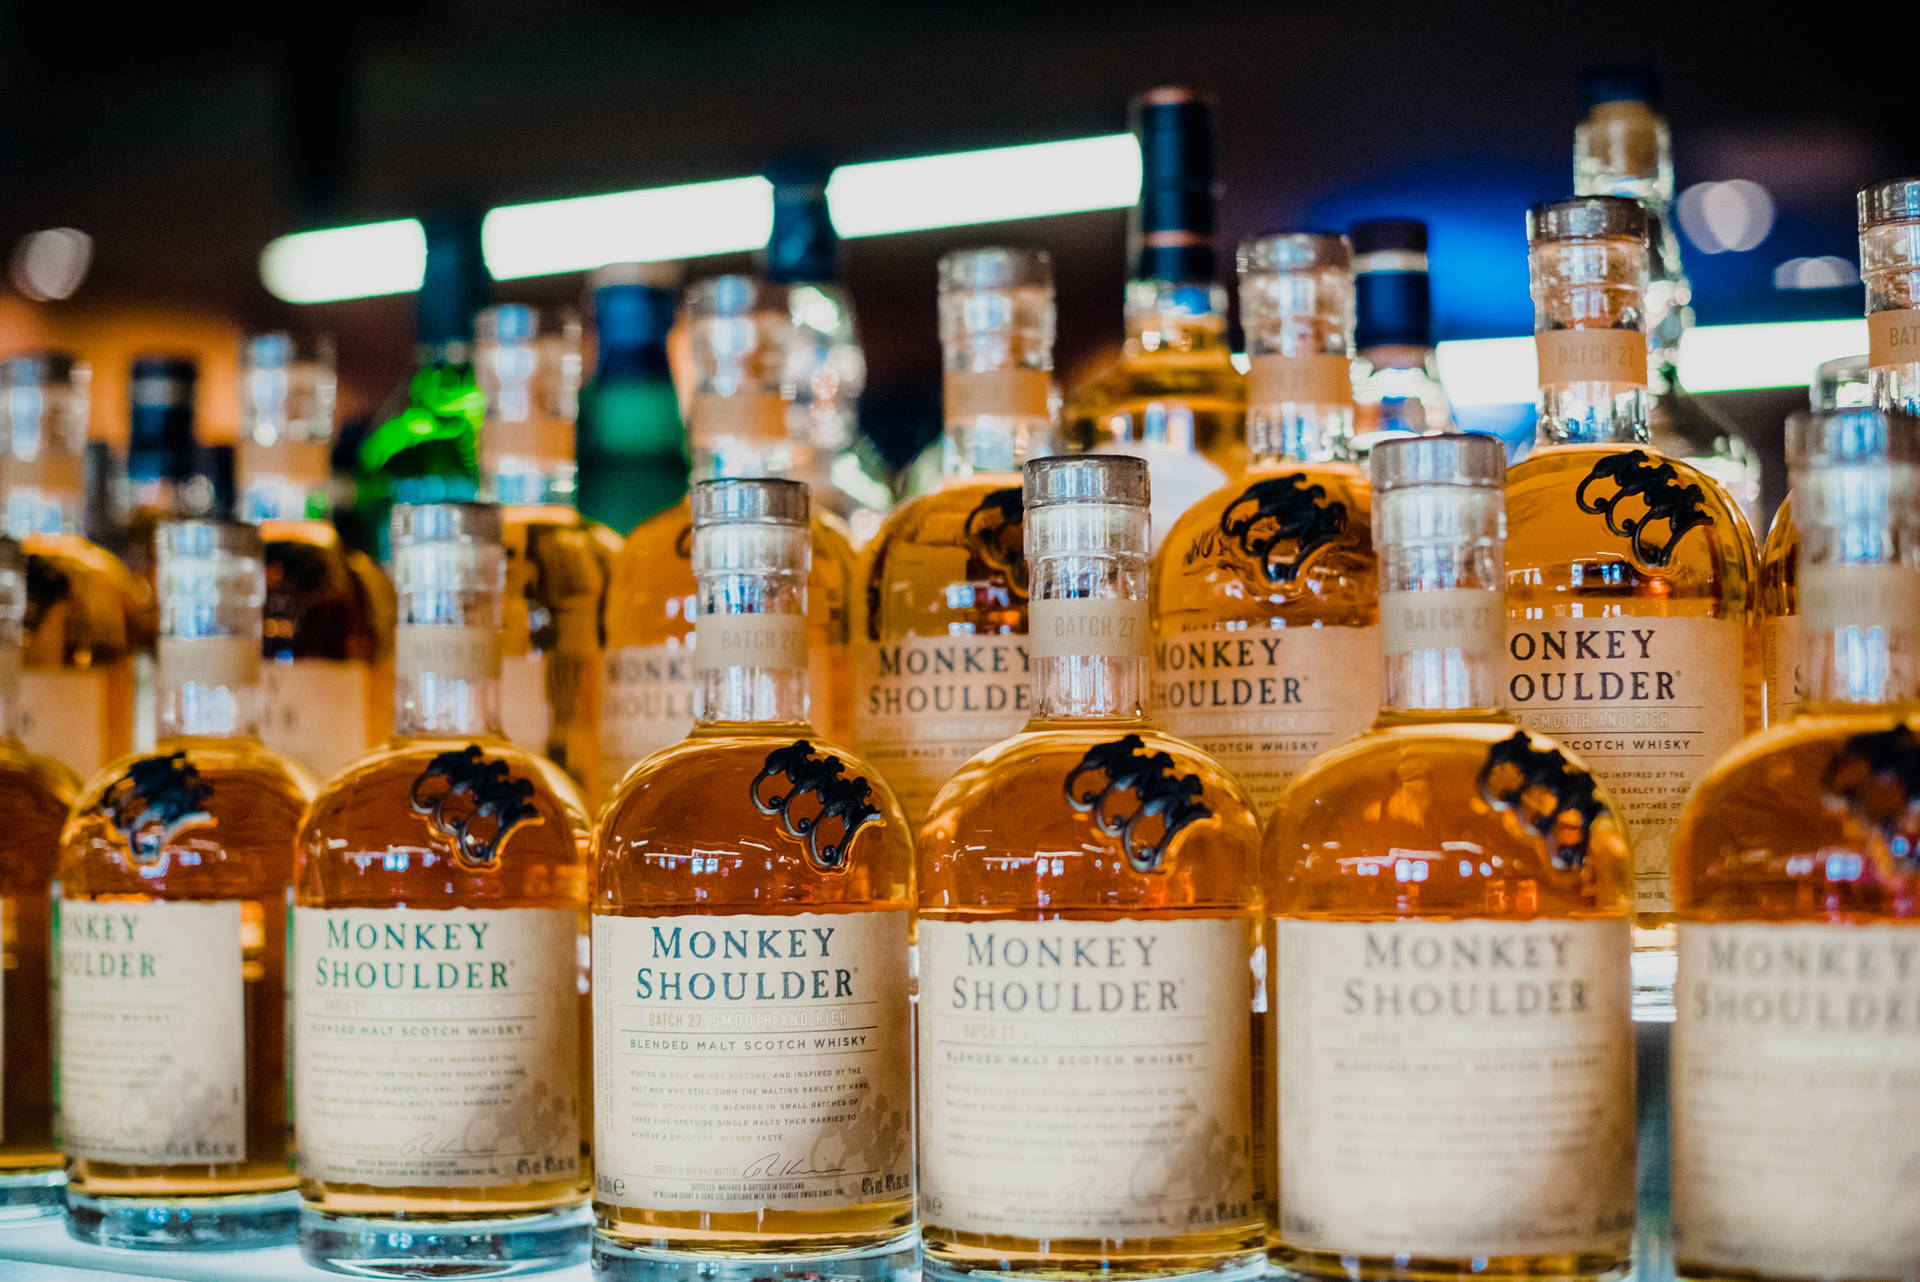 Monkey Shoulder Drink In Rows Picture